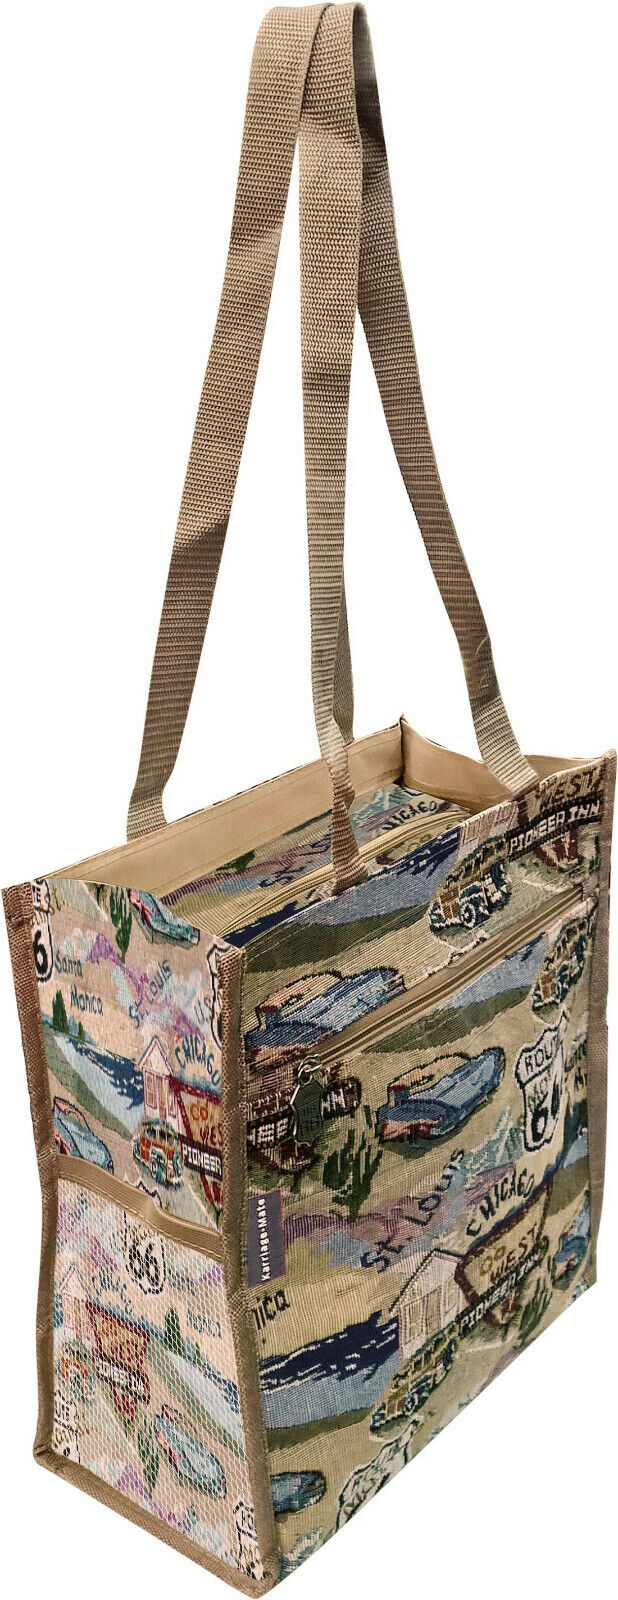 Route 66 Tapestry Travel Shopping Tote Bag - T312A#66